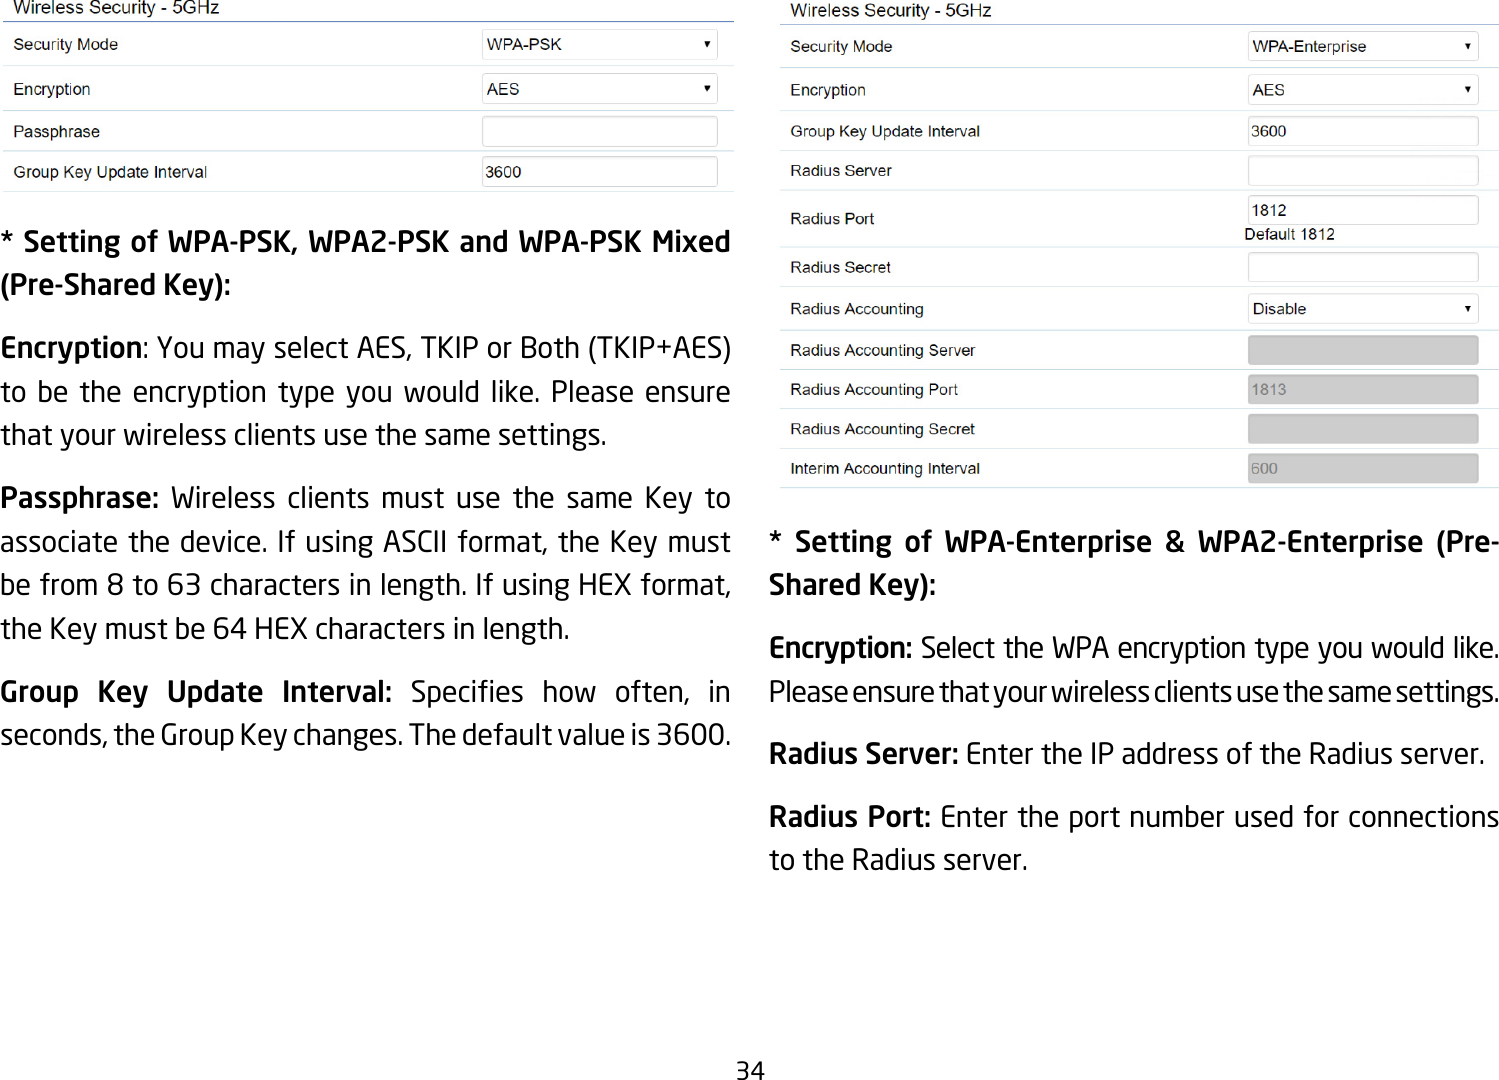 34* Setting of WPA-PSK, WPA2-PSK and WPA-PSK Mixed (Pre-Shared Key):Encryption:YoumayselectAES,TKIPorBoth(TKIP+AES)to be the encryption type you would like. Please ensure that your wireless clients use the same settings.Passphrase:  Wireless clients must use the same Key to associate the device. If using ASCII format, the Key must be from 8 to 63 characters in length. If using HEX format, the Key must be 64 HEX characters in length.Group Key Update Interval: Species how often, inseconds, the Group Key changes. The default value is 3600.**  Setting  of  WPA-Enterprise  &amp;  WPA2-Enterprise  (Pre-Shared Key):Encryption: Select the WPA encryption type you would like. Please ensure that your wireless clients use the same settings.Radius Server: Enter the IP address of the Radius server.Radius Port: Enter the port number used for connections to the Radius server.